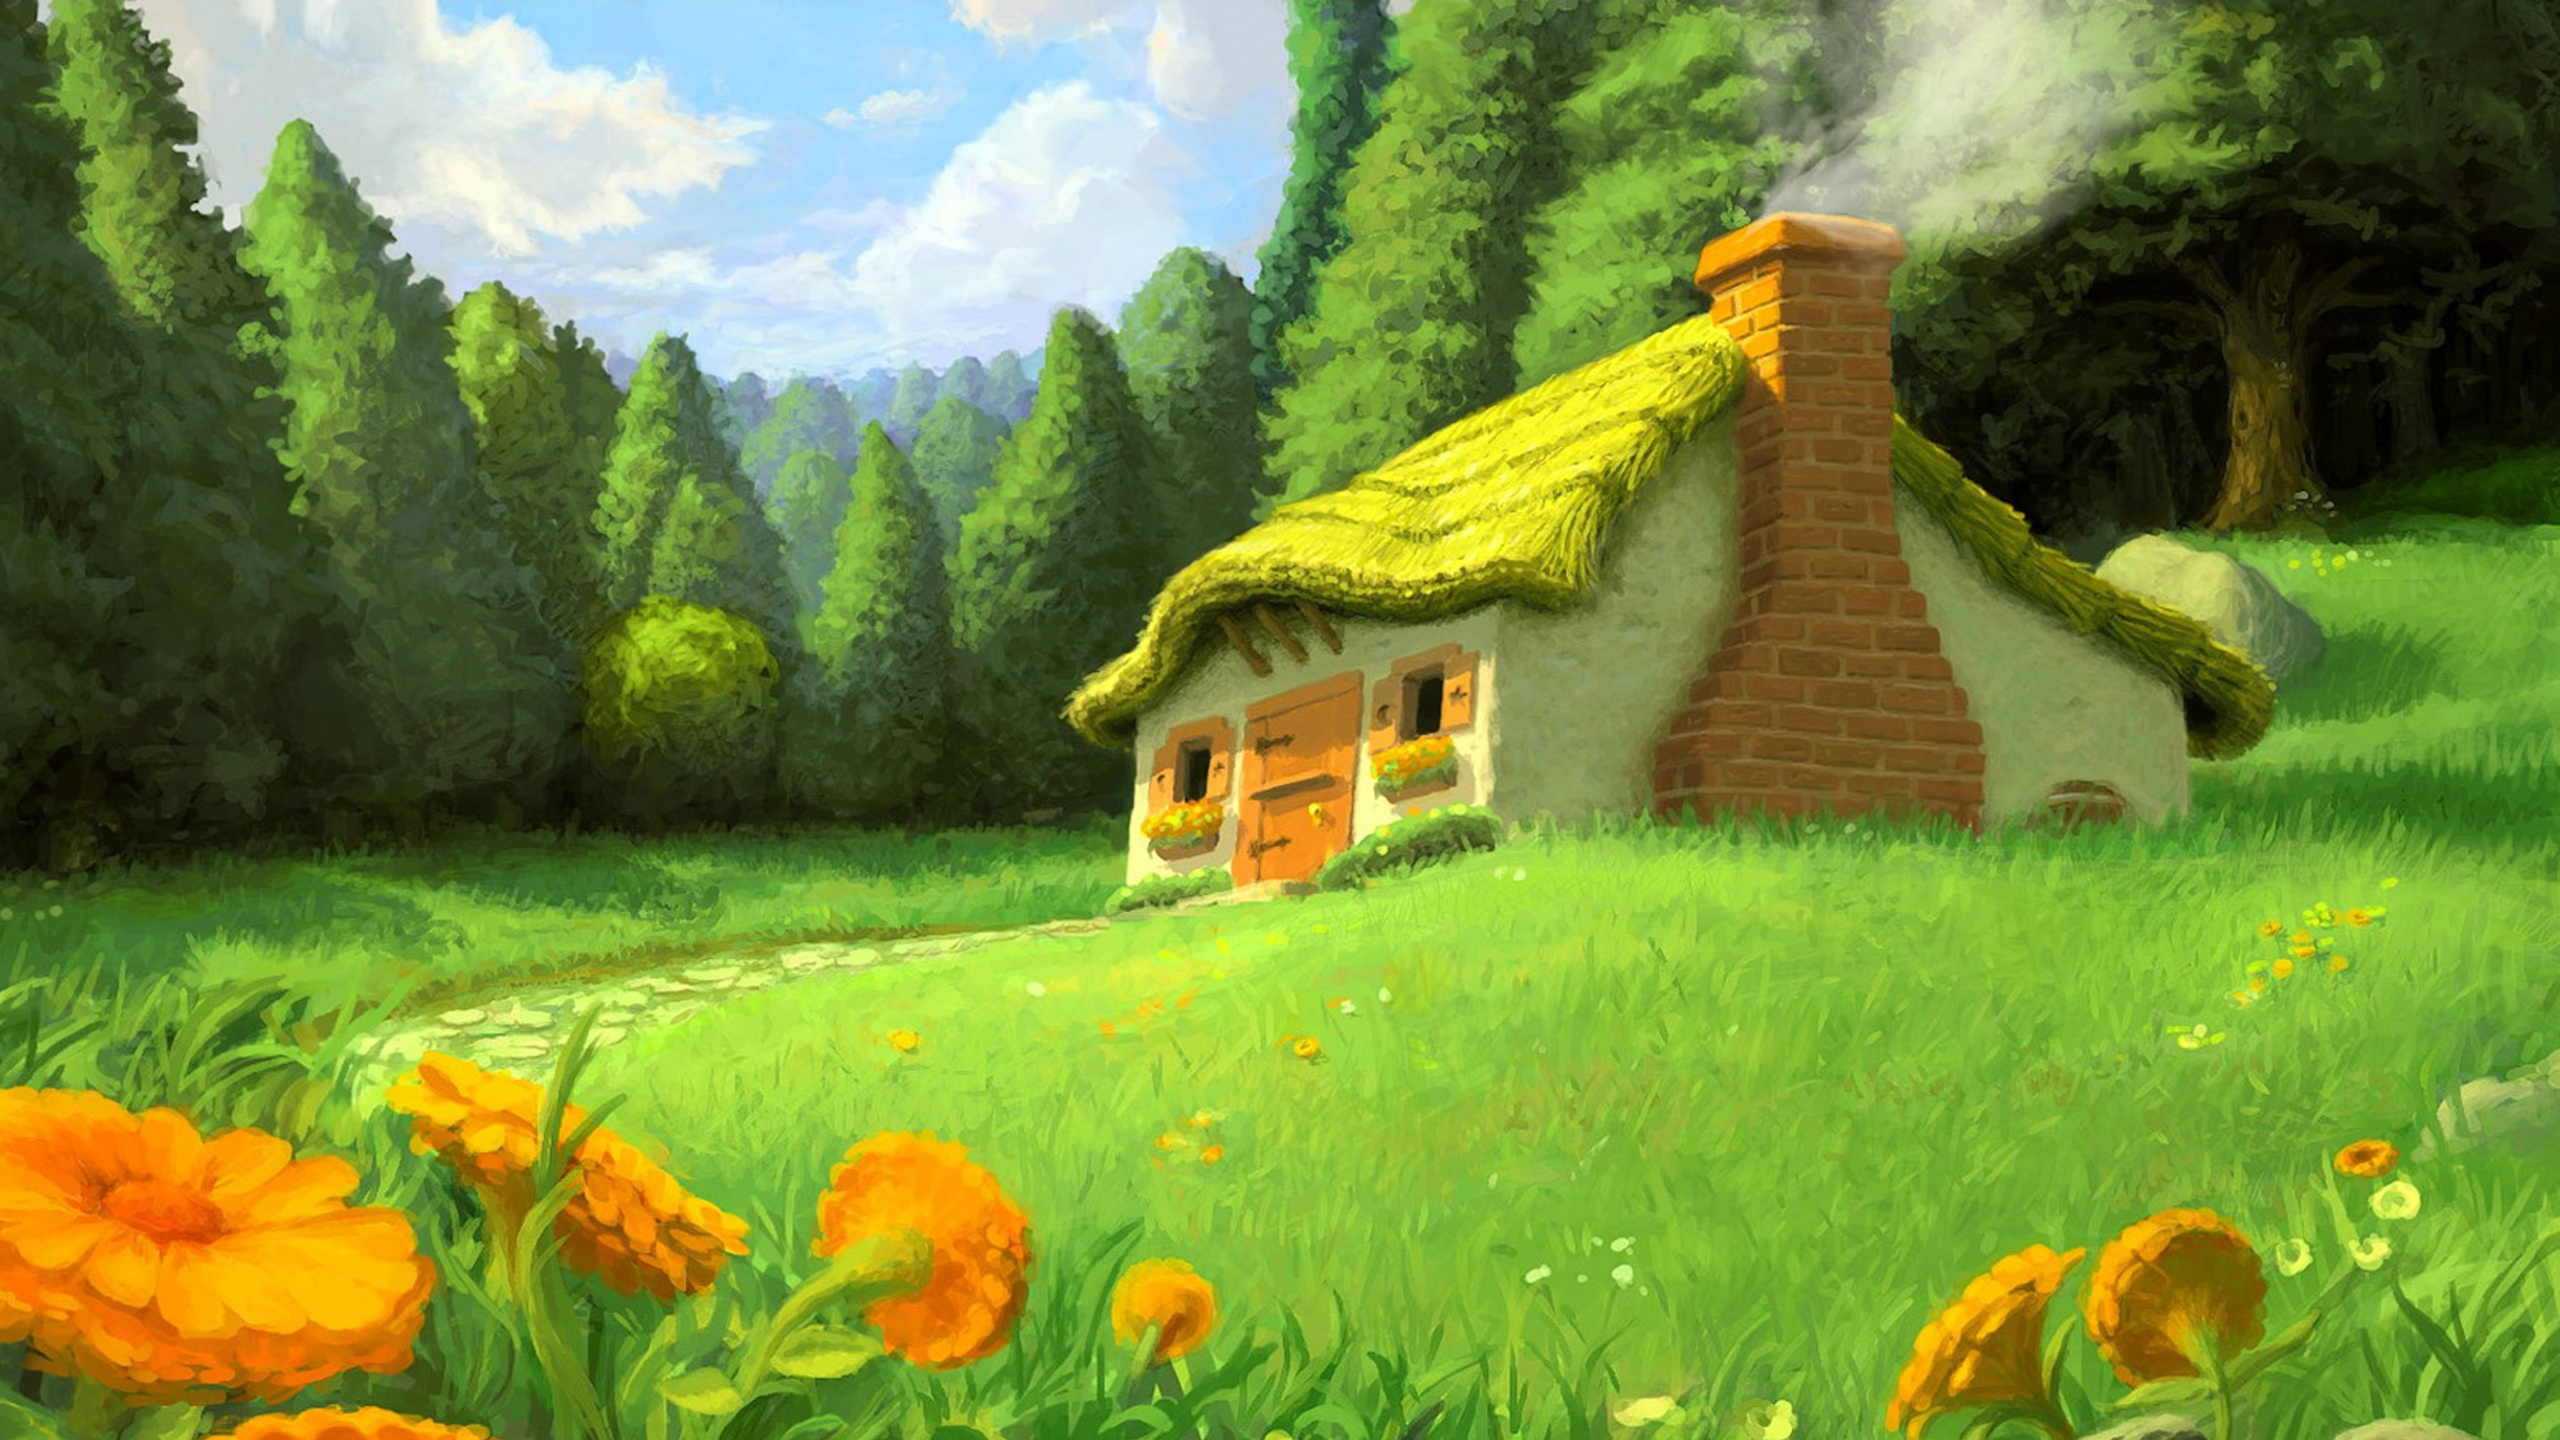 Brown Wooden House on Green Grass Field Near Green Trees During Daytime. Wallpaper in 2560x1440 Resolution